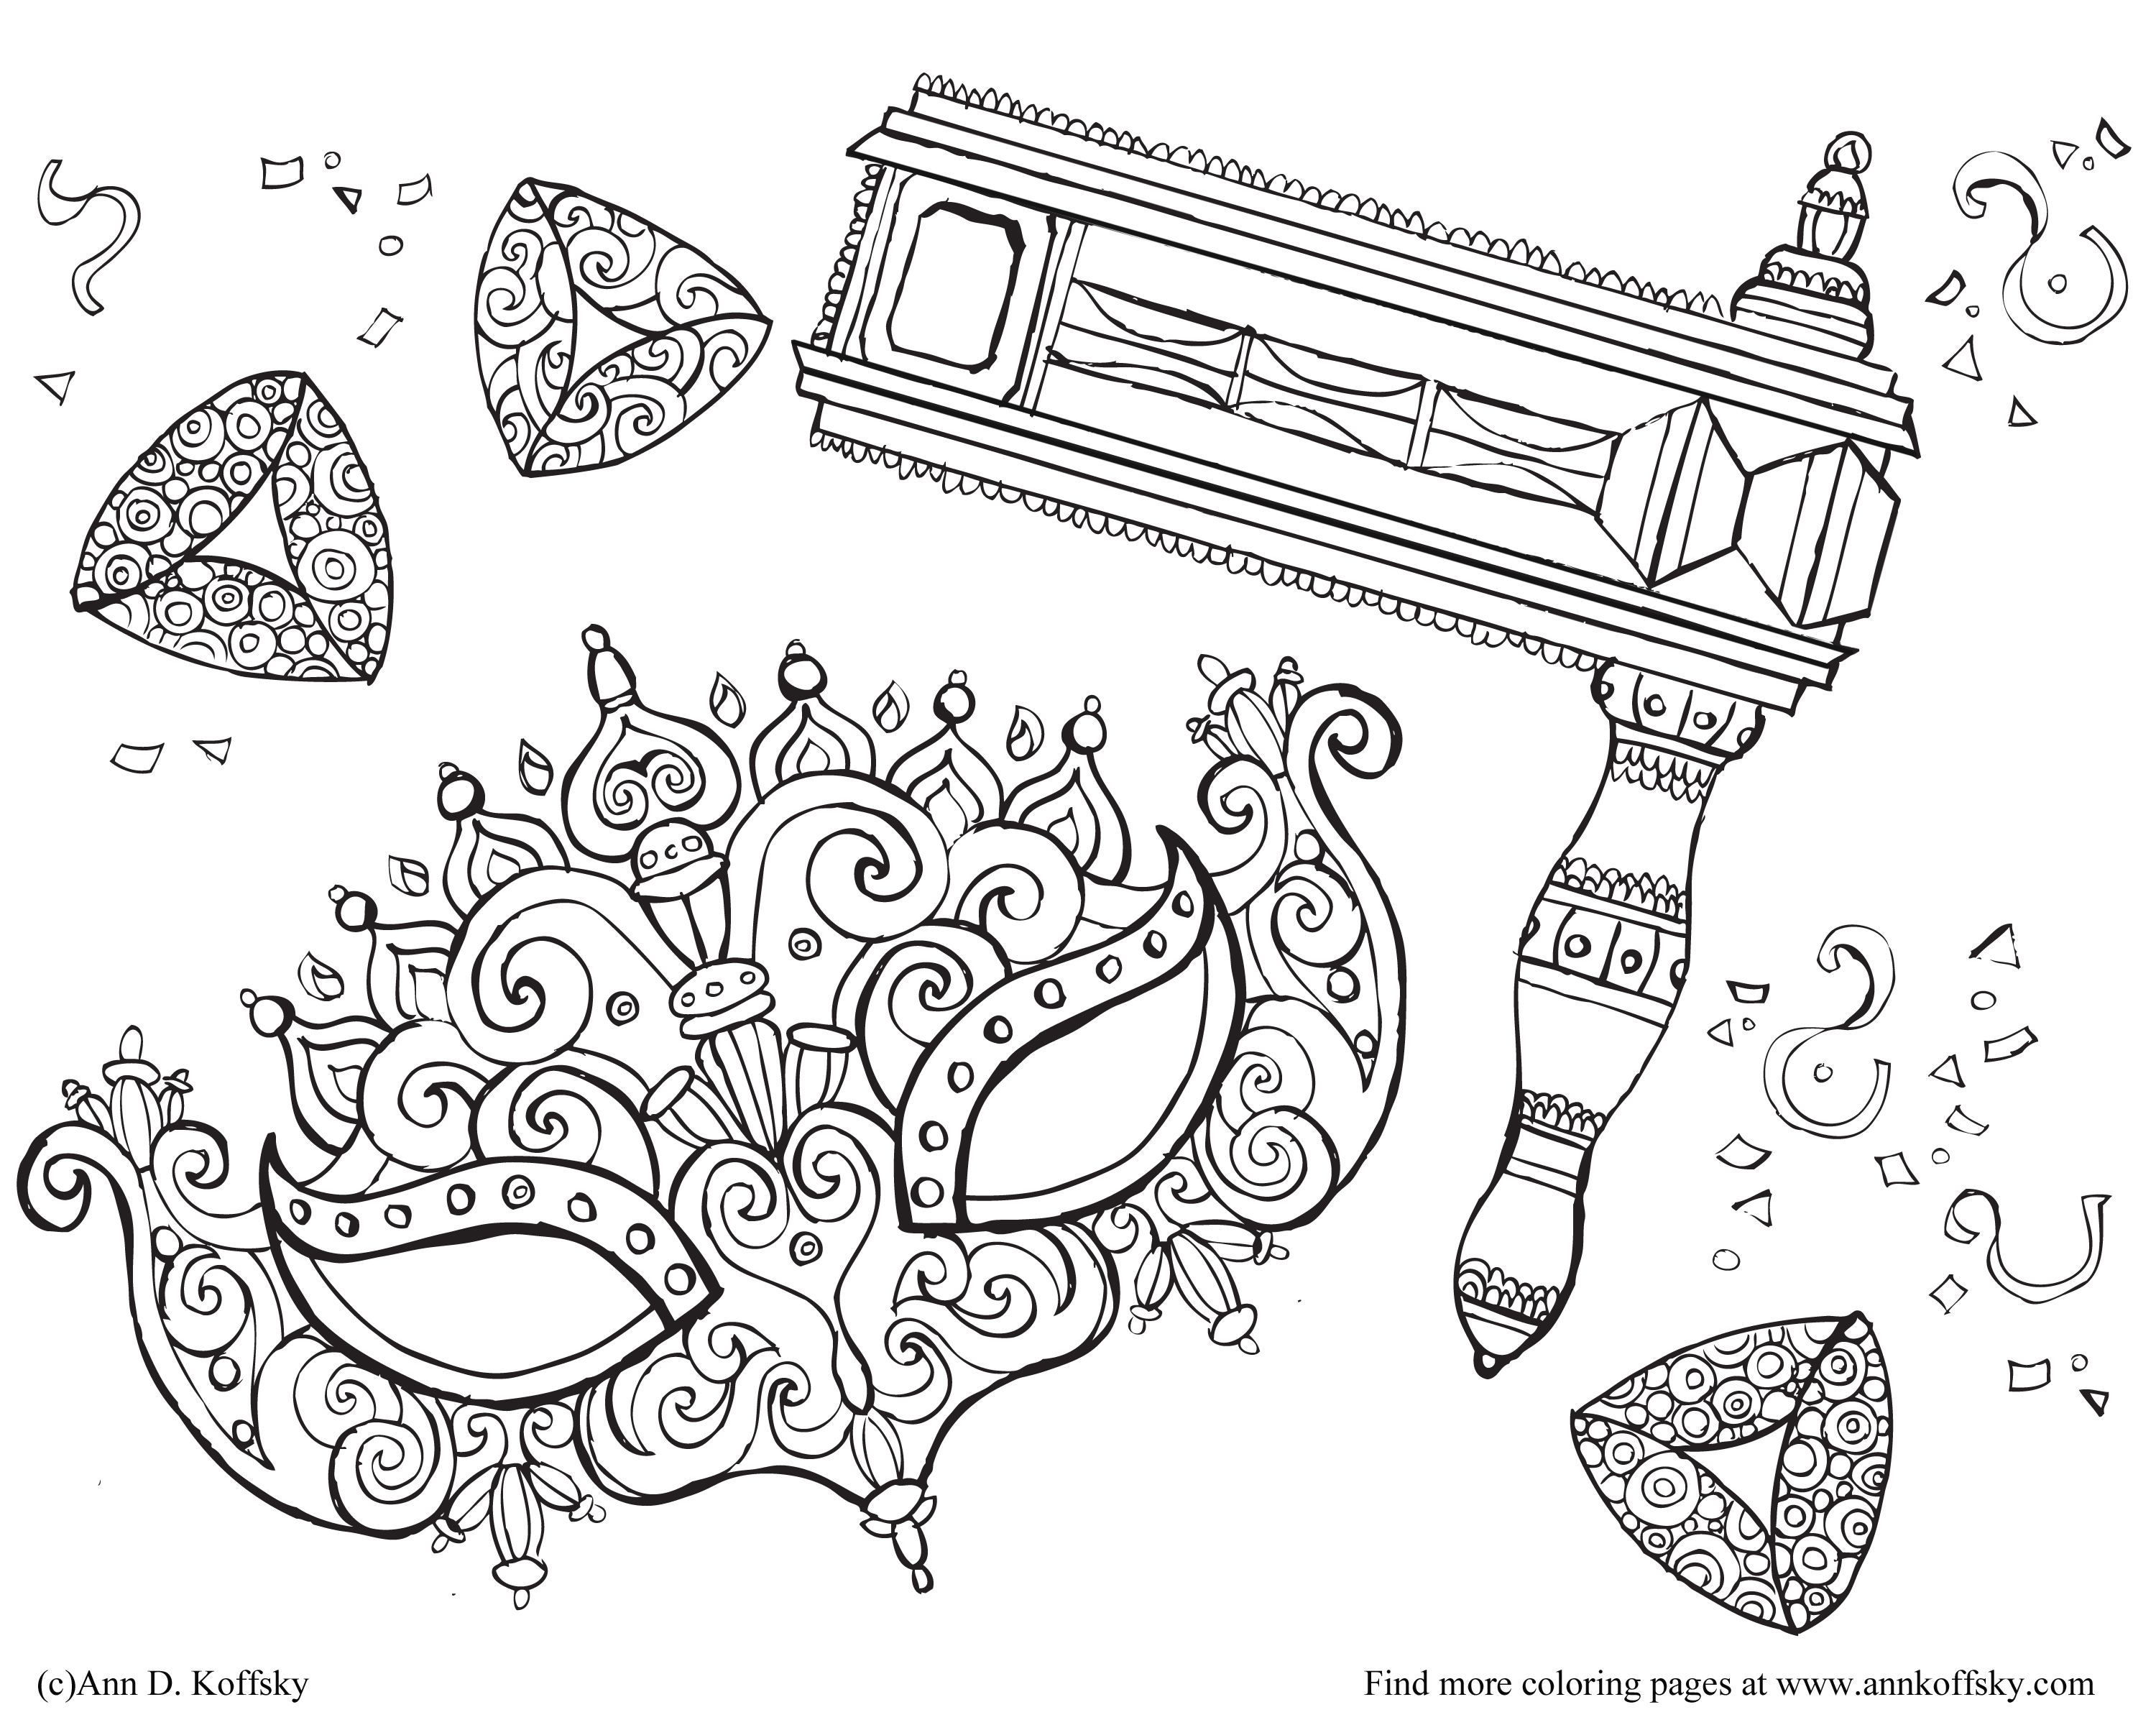 Purim coloring page â ann d koffsky